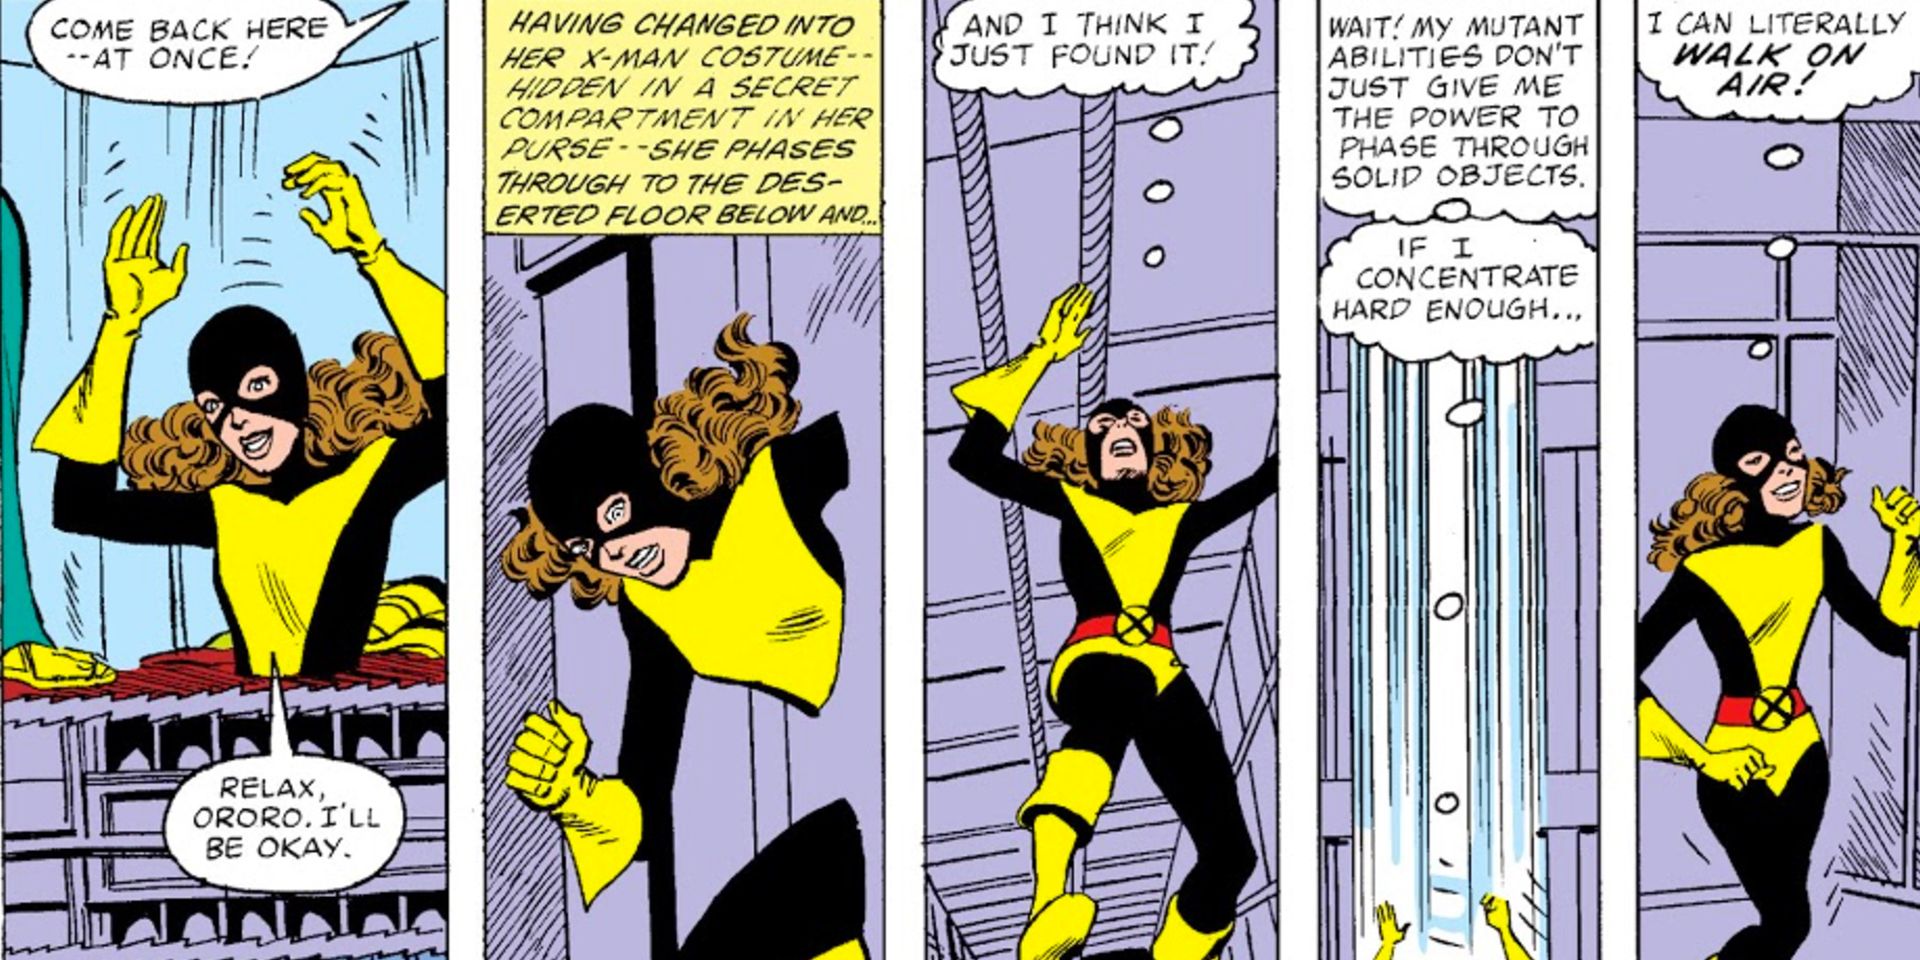 Kitty Pryde Discovers She Can Walk On Air